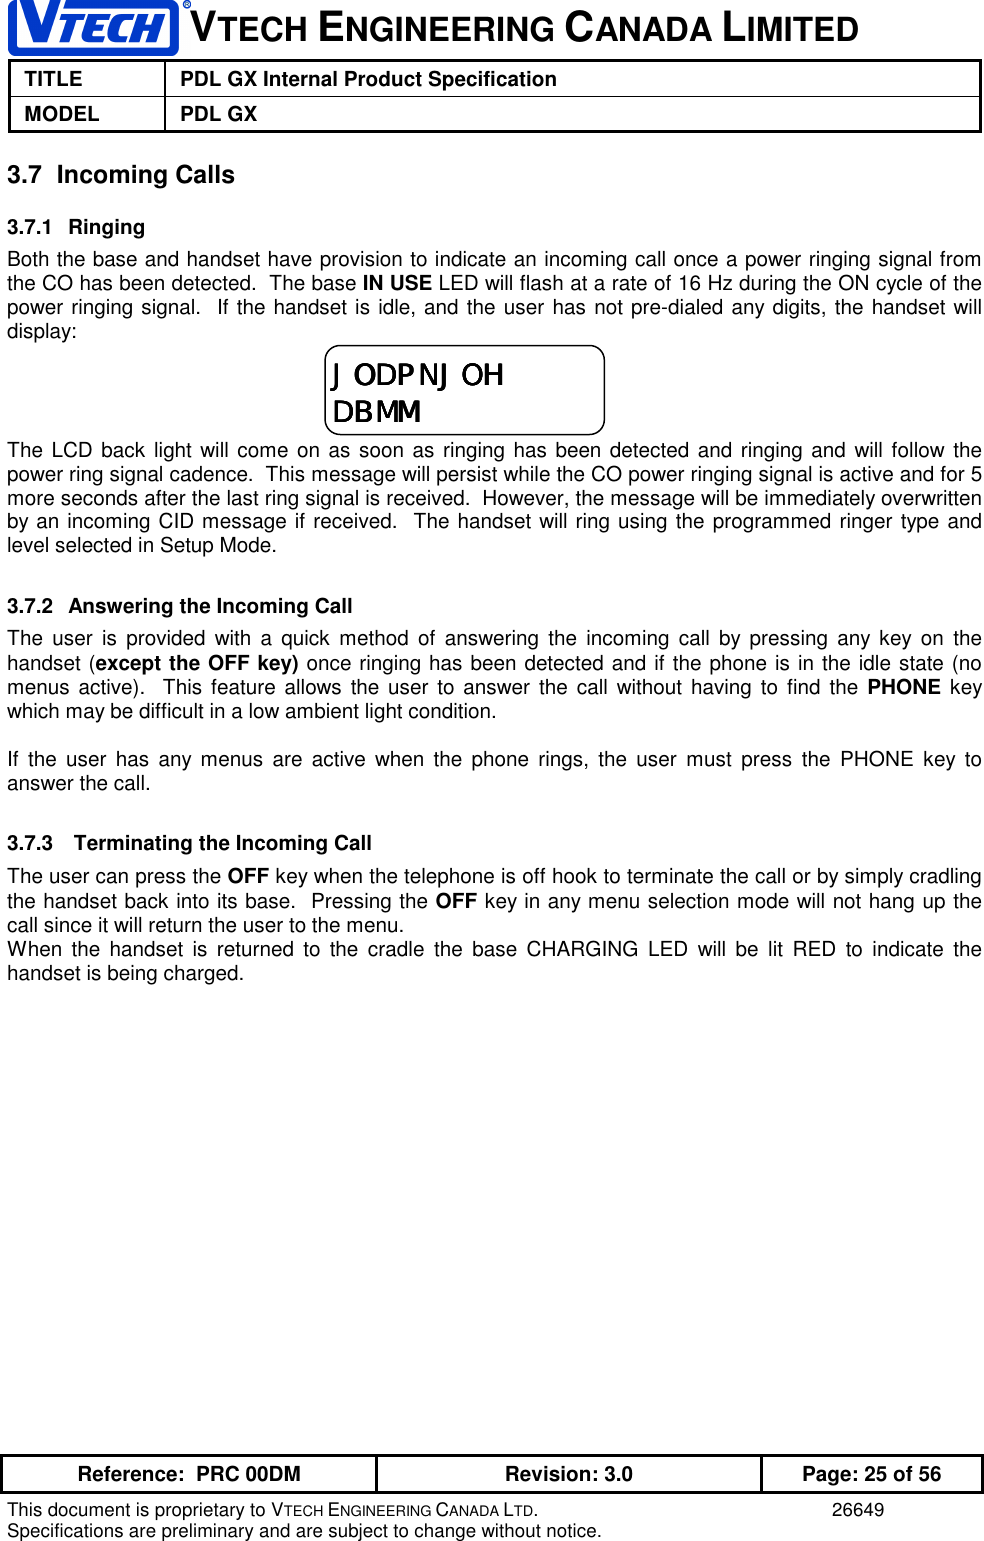 VTECH ENGINEERING CANADA LIMITEDTITLE PDL GX Internal Product SpecificationMODEL PDL GXReference:  PRC 00DM Revision: 3.0 Page: 25 of 56This document is proprietary to VTECH ENGINEERING CANADA LTD. 26649Specifications are preliminary and are subject to change without notice.3.7 Incoming Calls3.7.1 RingingBoth the base and handset have provision to indicate an incoming call once a power ringing signal fromthe CO has been detected.  The base IN USE LED will flash at a rate of 16 Hz during the ON cycle of thepower ringing signal.  If the handset is idle, and the user has not pre-dialed any digits, the handset willdisplay:The LCD back light will come on as soon as ringing has been detected and ringing and will follow thepower ring signal cadence.  This message will persist while the CO power ringing signal is active and for 5more seconds after the last ring signal is received.  However, the message will be immediately overwrittenby an incoming CID message if received.  The handset will ring using the programmed ringer type andlevel selected in Setup Mode.3.7.2  Answering the Incoming CallThe user is provided with a quick method of answering the incoming call by pressing any key on thehandset (except the OFF key) once ringing has been detected and if the phone is in the idle state (nomenus active).  This feature allows the user to answer the call without having to find the PHONE keywhich may be difficult in a low ambient light condition.If the user has any menus are active when the phone rings, the user must press the PHONE key toanswer the call.3.7.3   Terminating the Incoming CallThe user can press the OFF key when the telephone is off hook to terminate the call or by simply cradlingthe handset back into its base.  Pressing the OFF key in any menu selection mode will not hang up thecall since it will return the user to the menu.When the handset is returned to the cradle the base CHARGING LED will be lit RED to indicate thehandset is being charged.JODPNJOHJODPNJOHJODPNJOHJODPNJOHDBMMDBMMDBMMDBMM